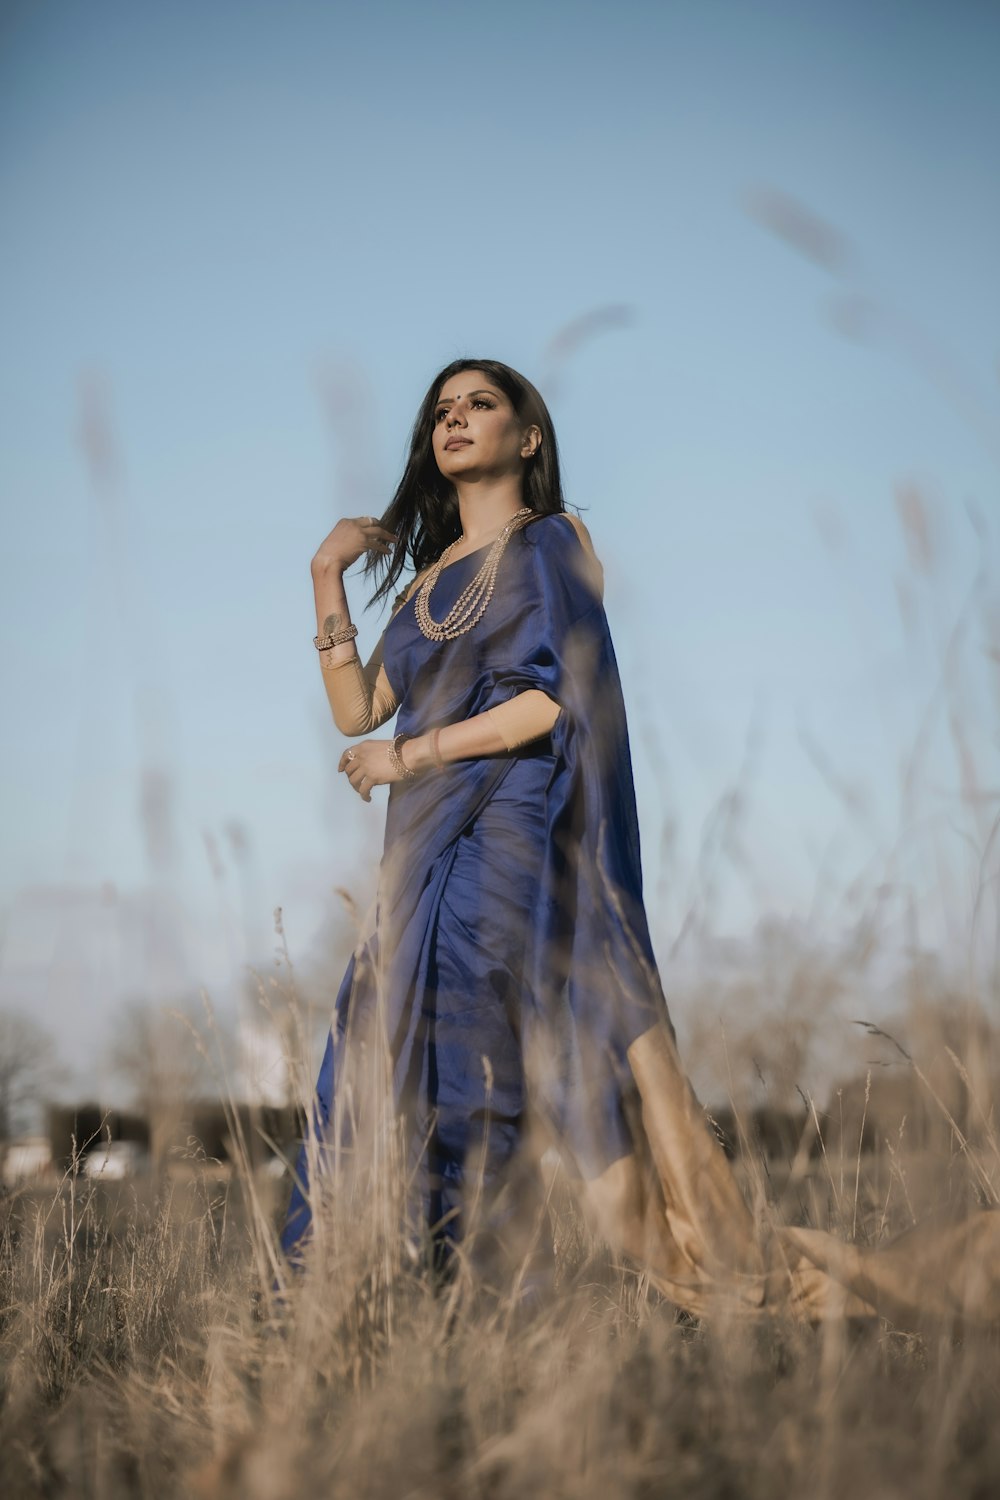 Woman In Saree Pictures | Download Free Images on Unsplash